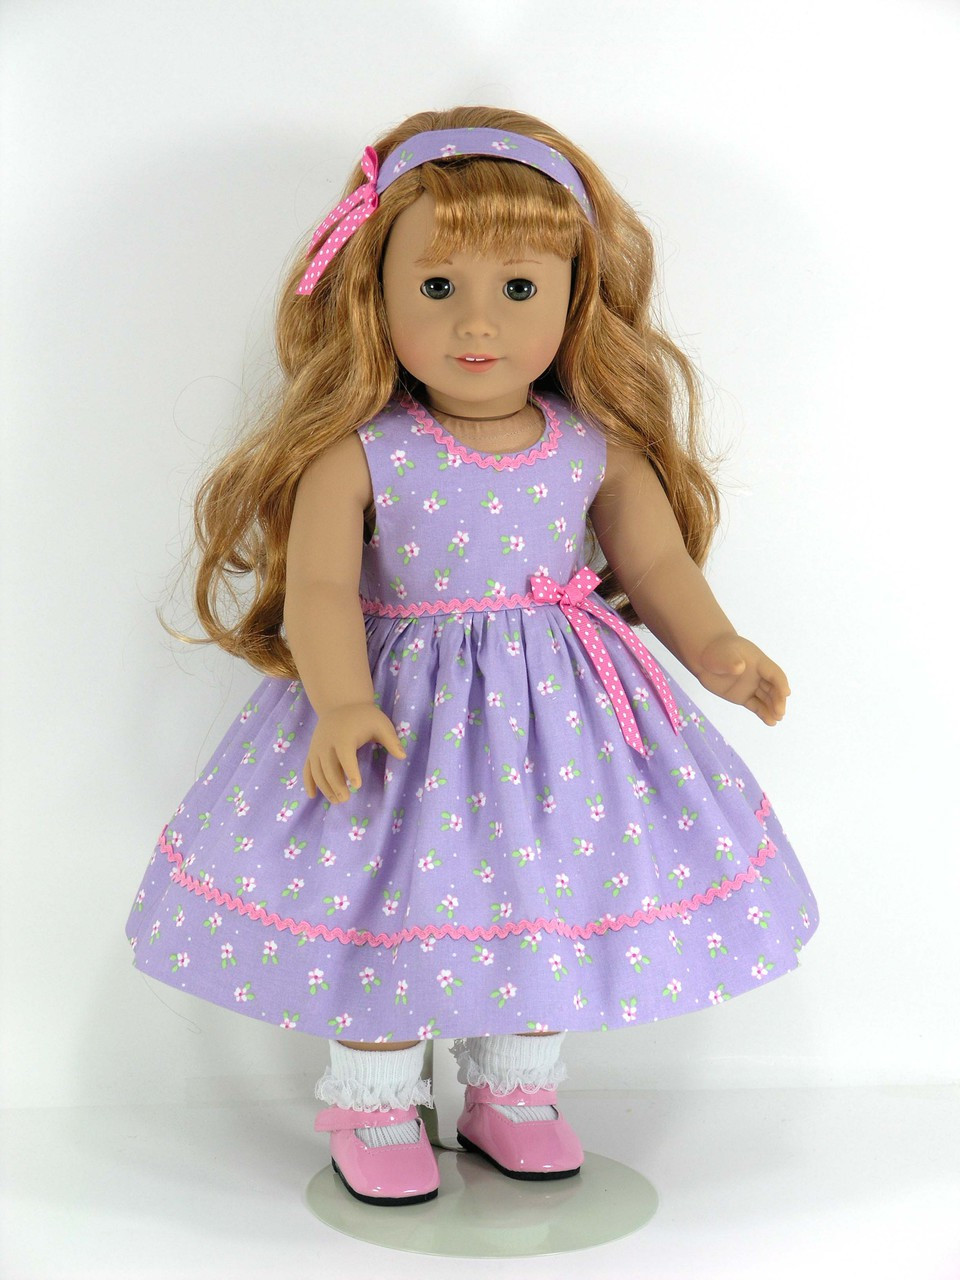 Doll Dress Flowered Outfit Vintage Fashion Fit American Girl Doll 18 Inch  Dolls